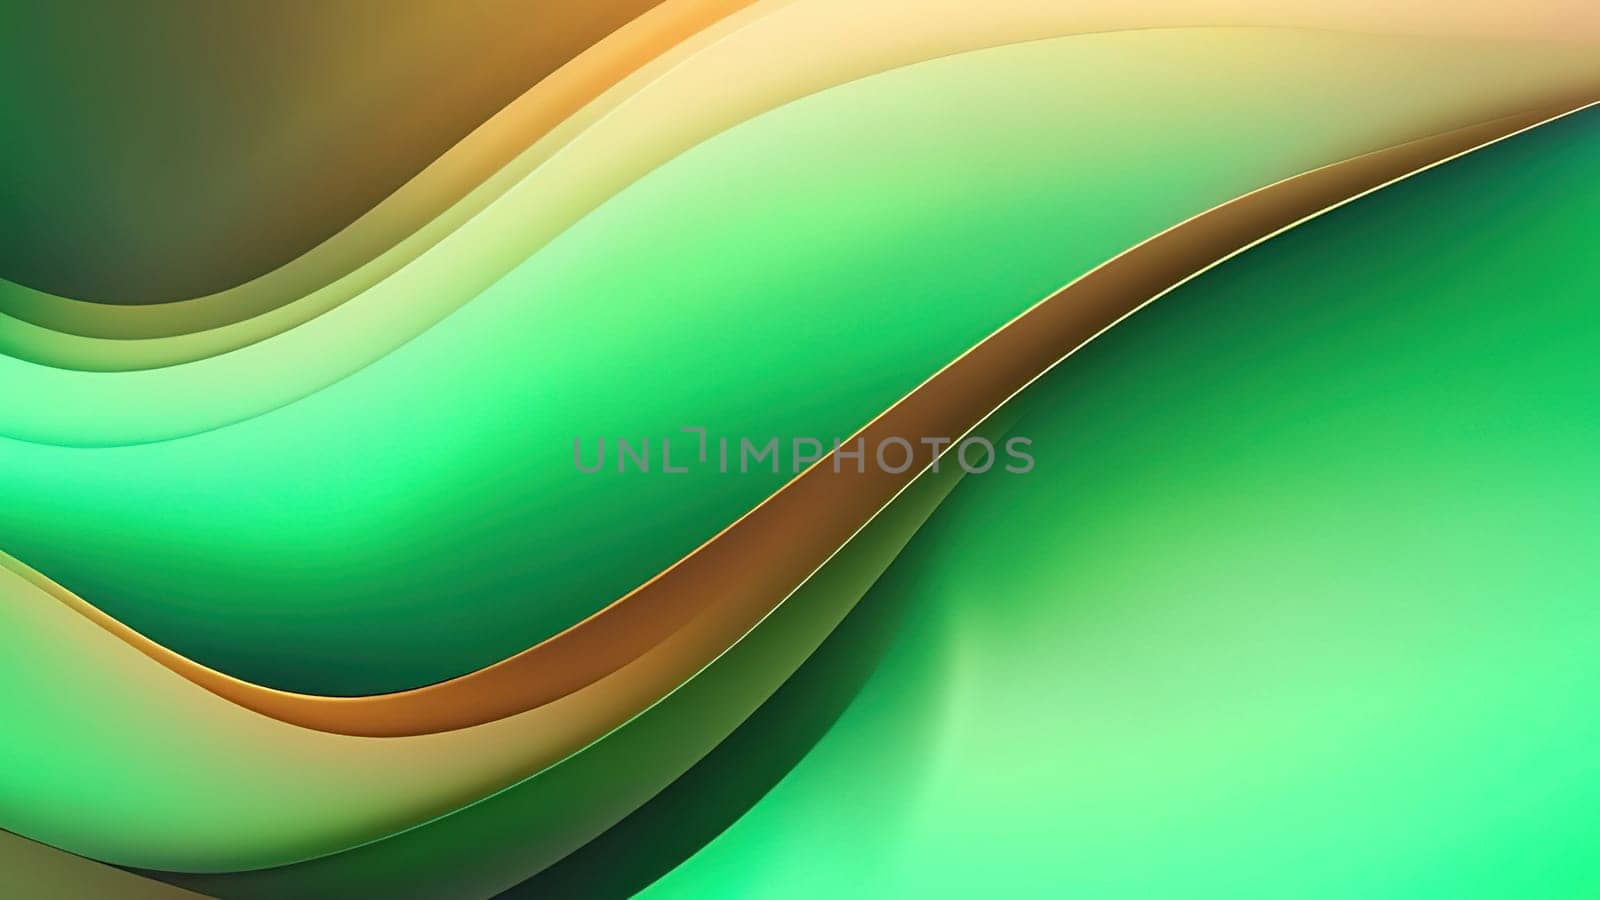 Abstract wavy background. 3d rendering, 3d illustration.abstract background with smooth lines in green, yellow and brown colors.Abstract green background with smooth wavy lines. Vector Illustration.